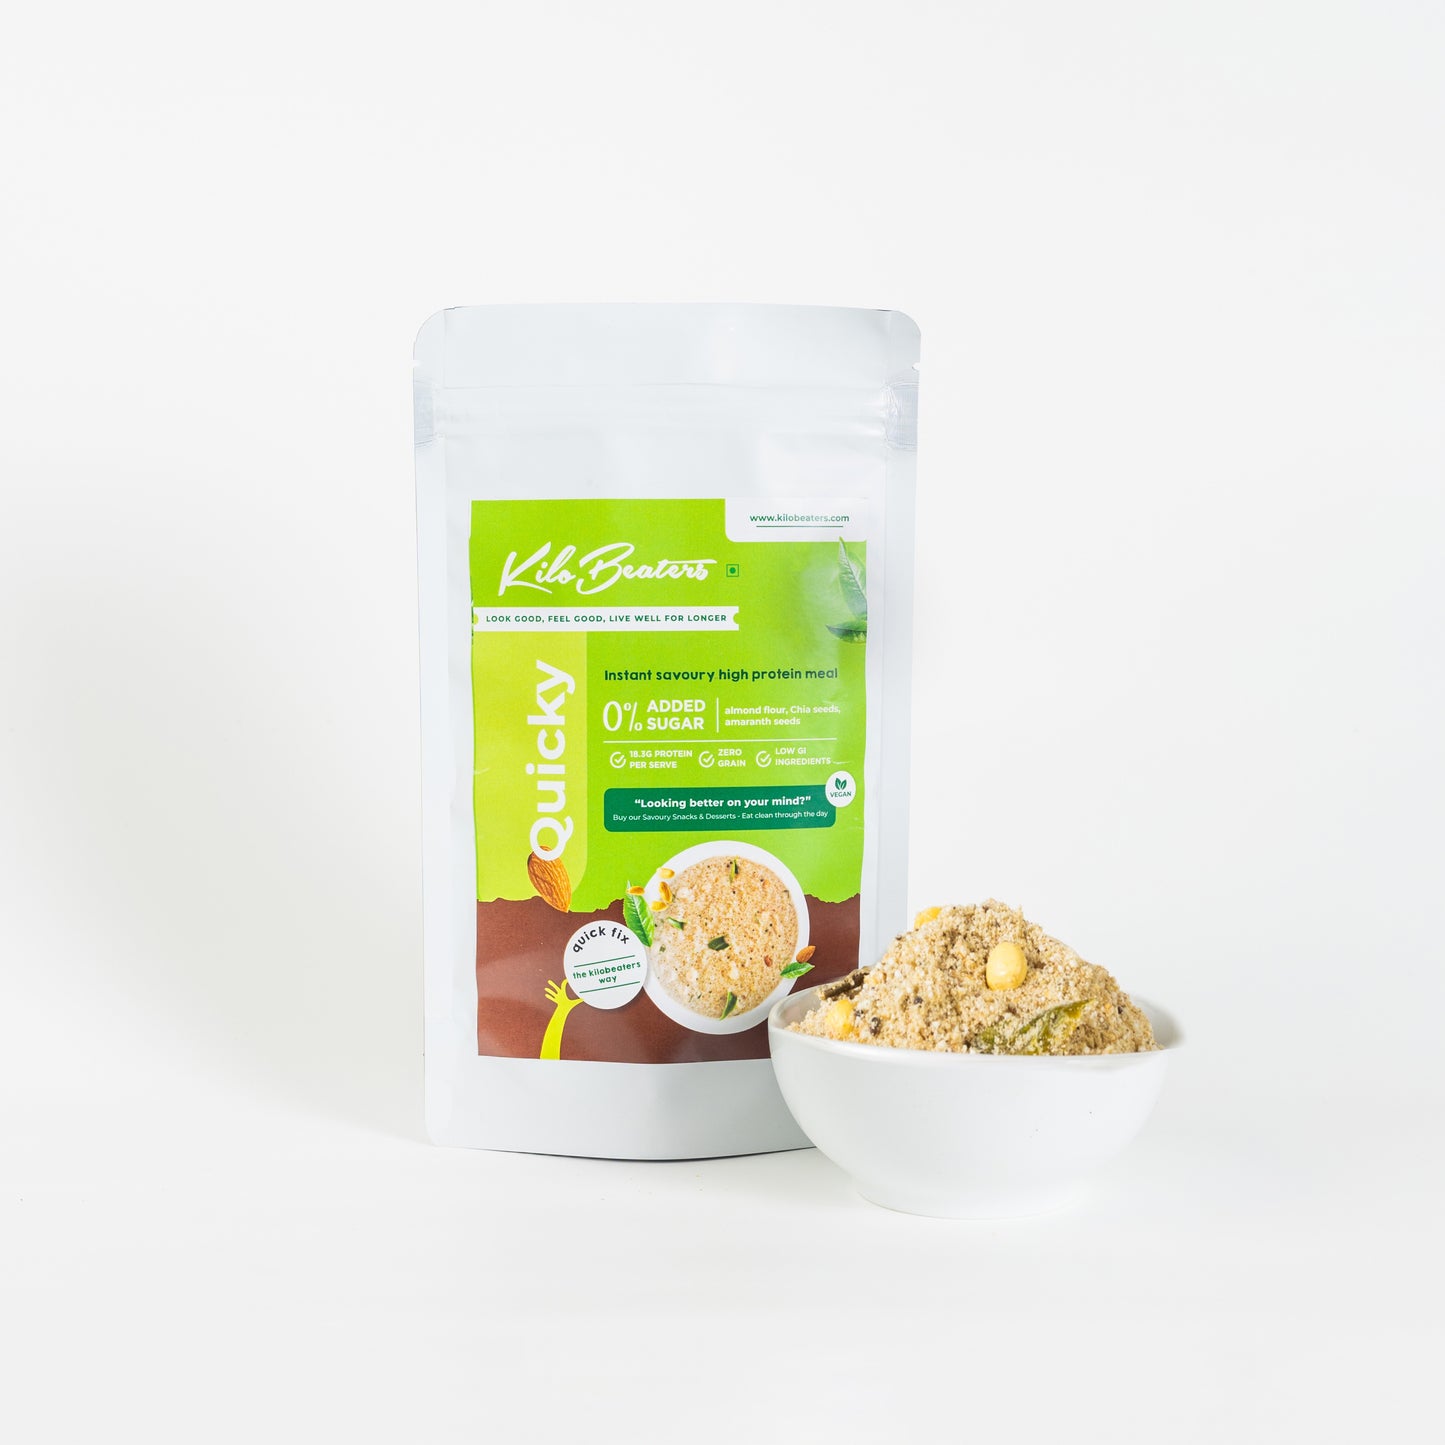 Quicky - An instant high protein meal